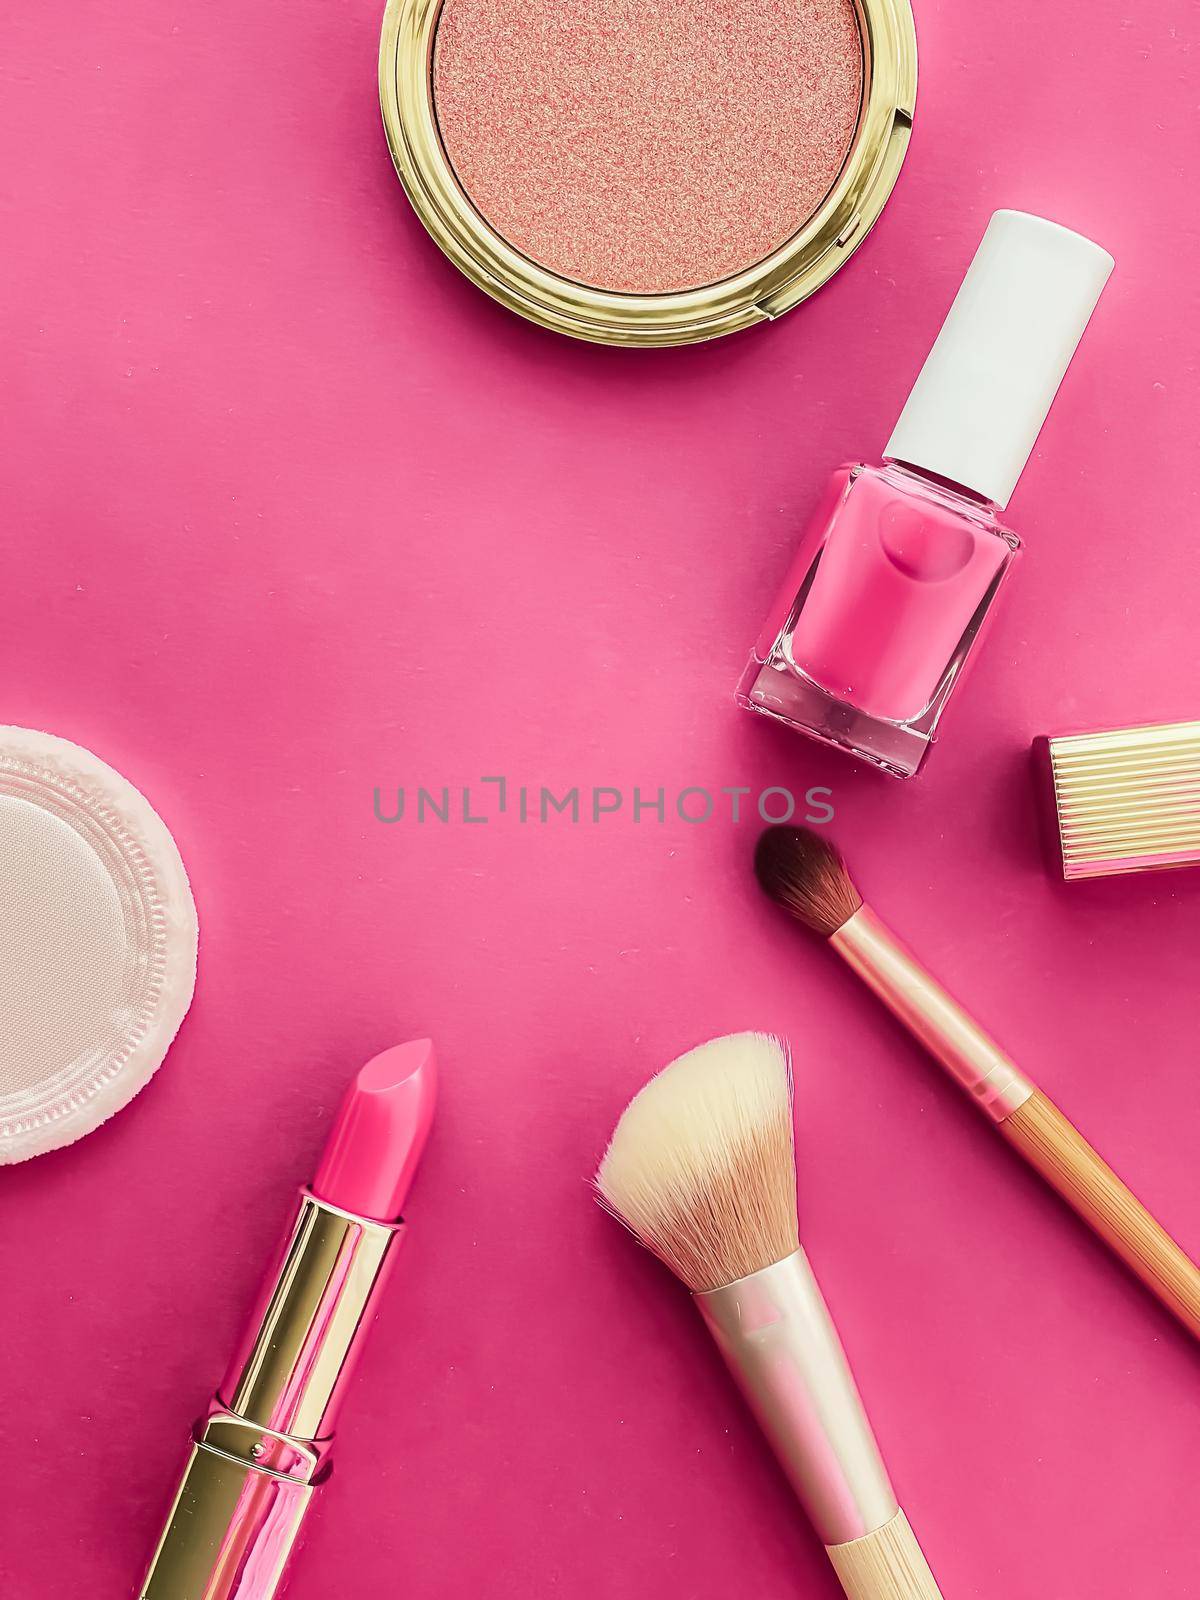 Beauty, make-up and cosmetics flatlay design with copyspace, cosmetic products and makeup tools on pink background, girly and feminine style by Anneleven